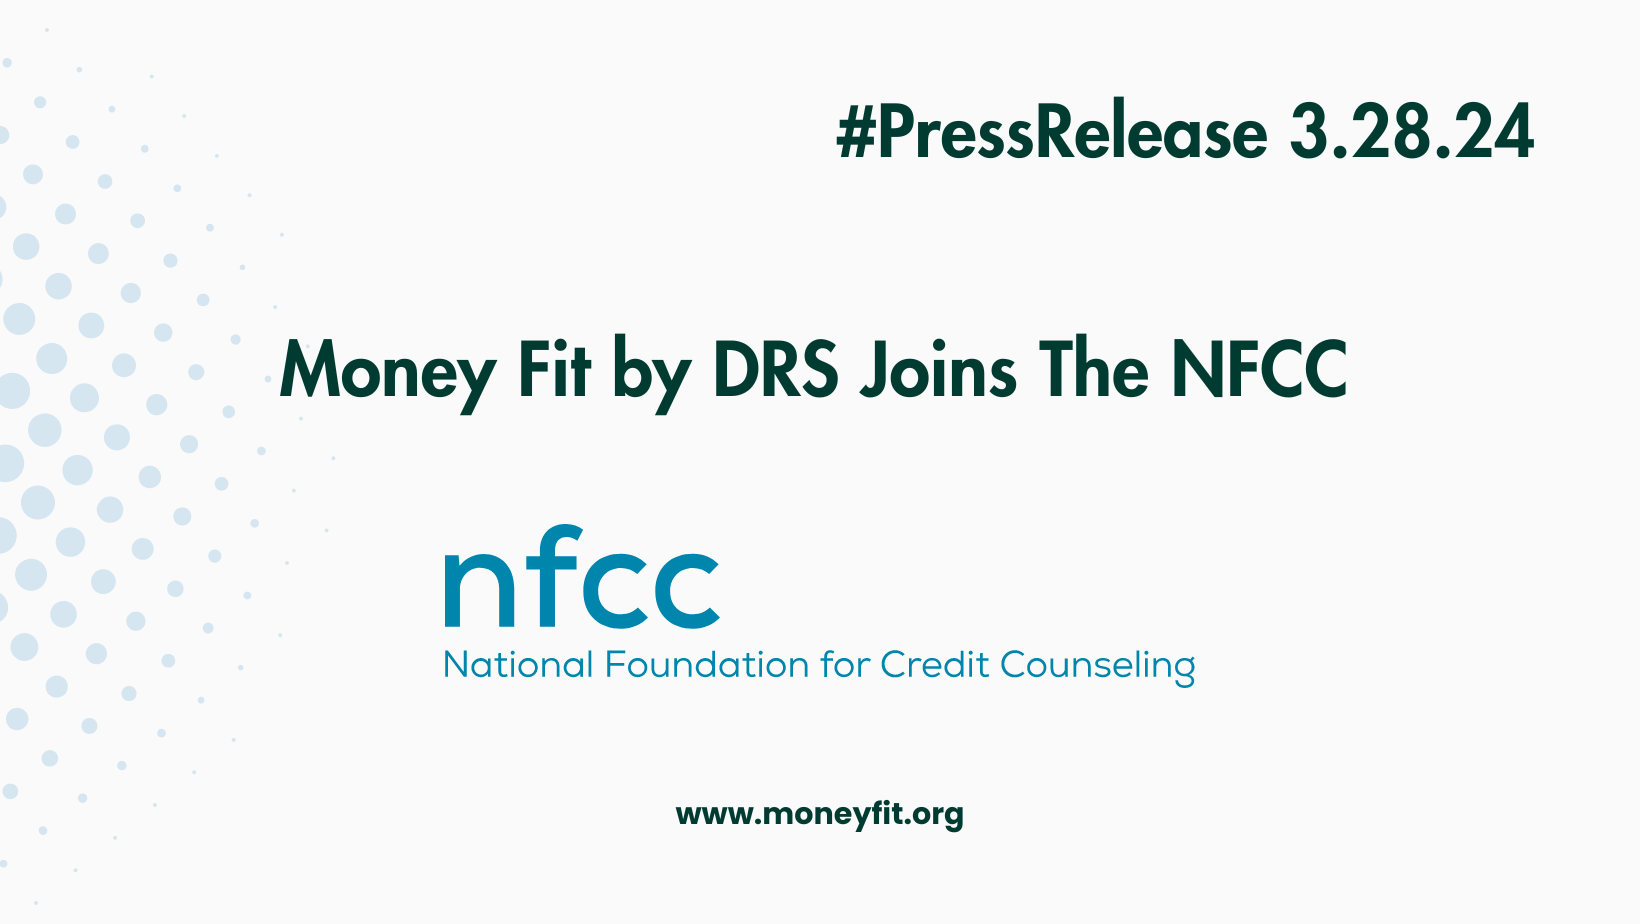 Money Fit by DRS Joins NFCC